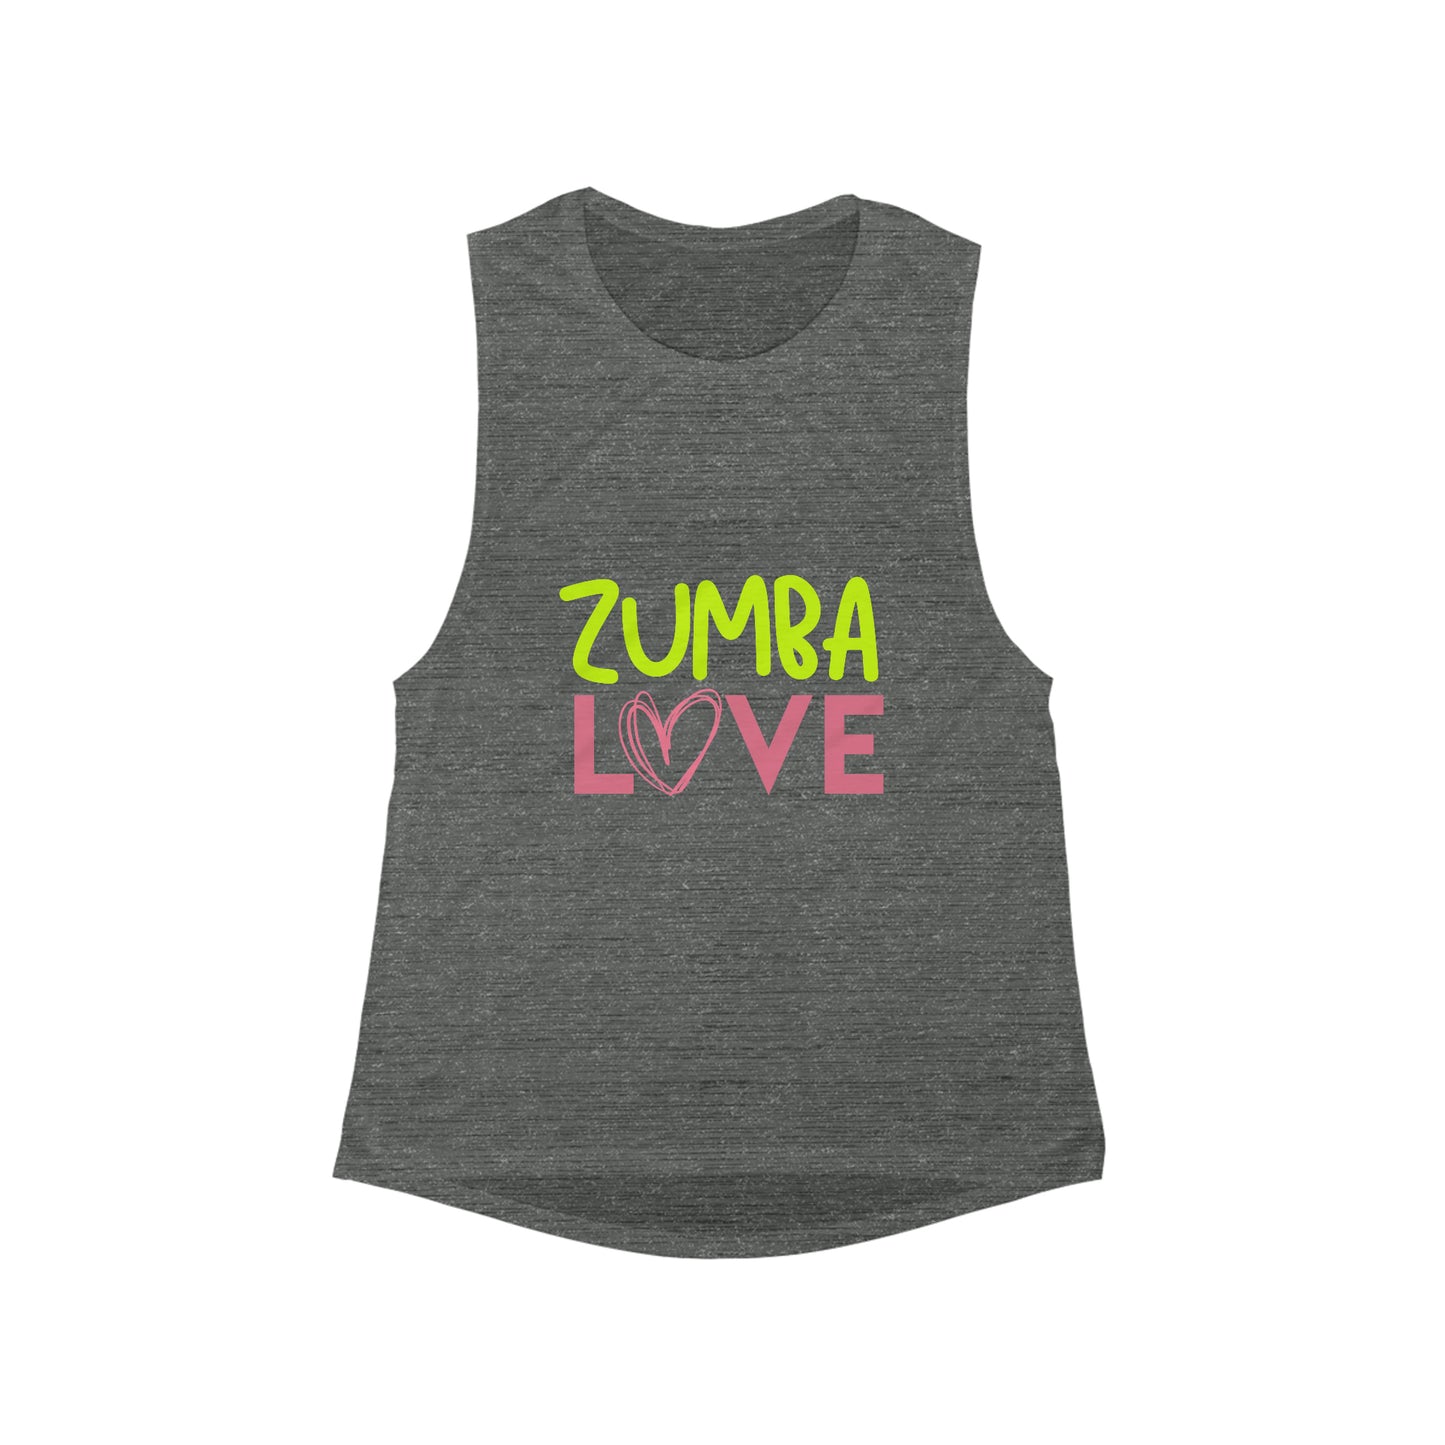 Custim Made Top Tank for Zumba Lovers 